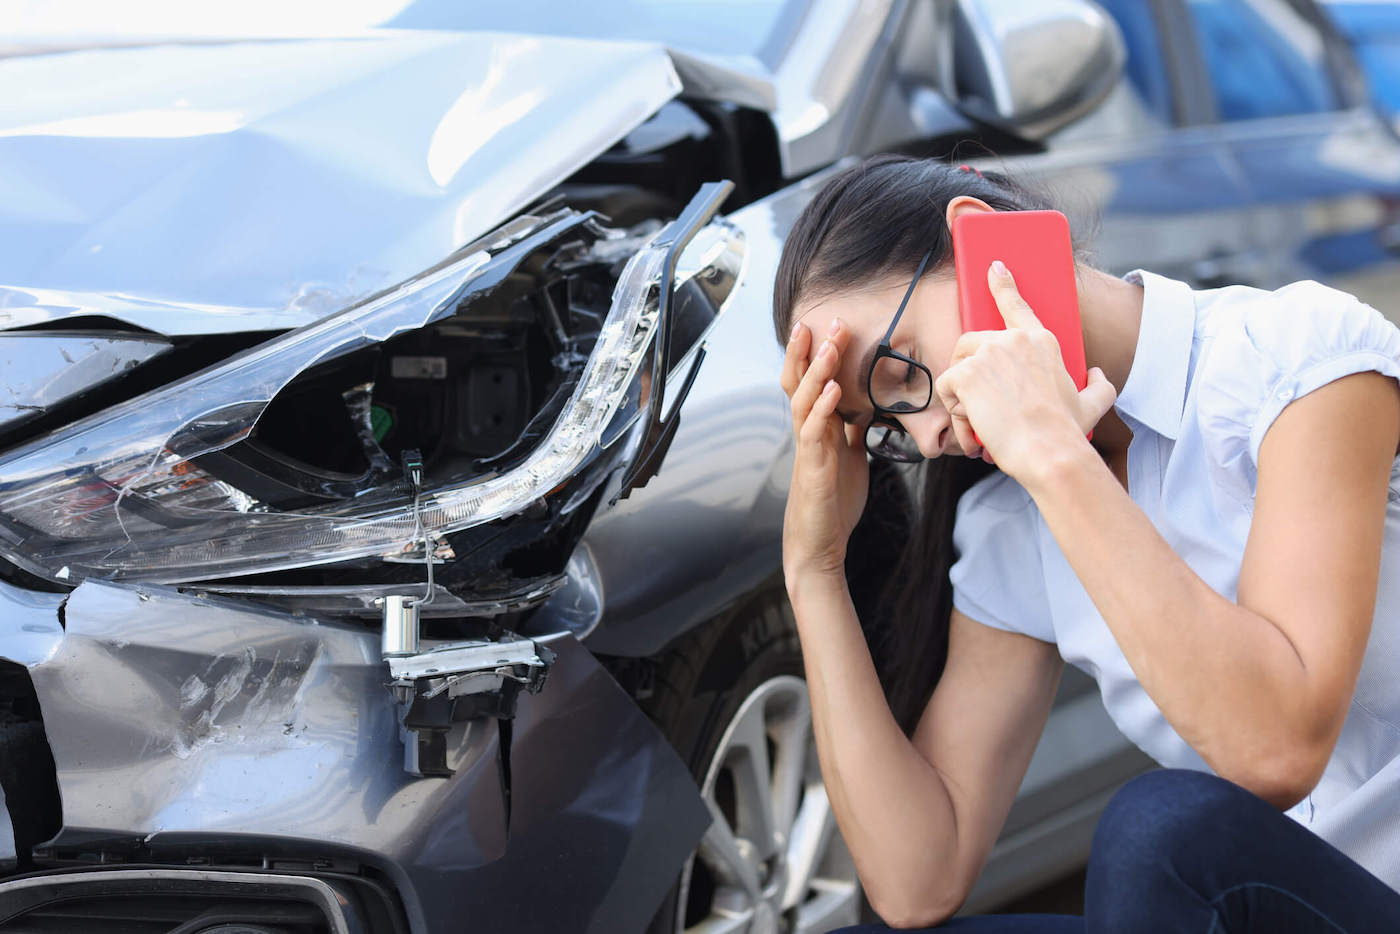 Will My Insurance Rate Increase After a Not-at-Fault Accident? - Experian